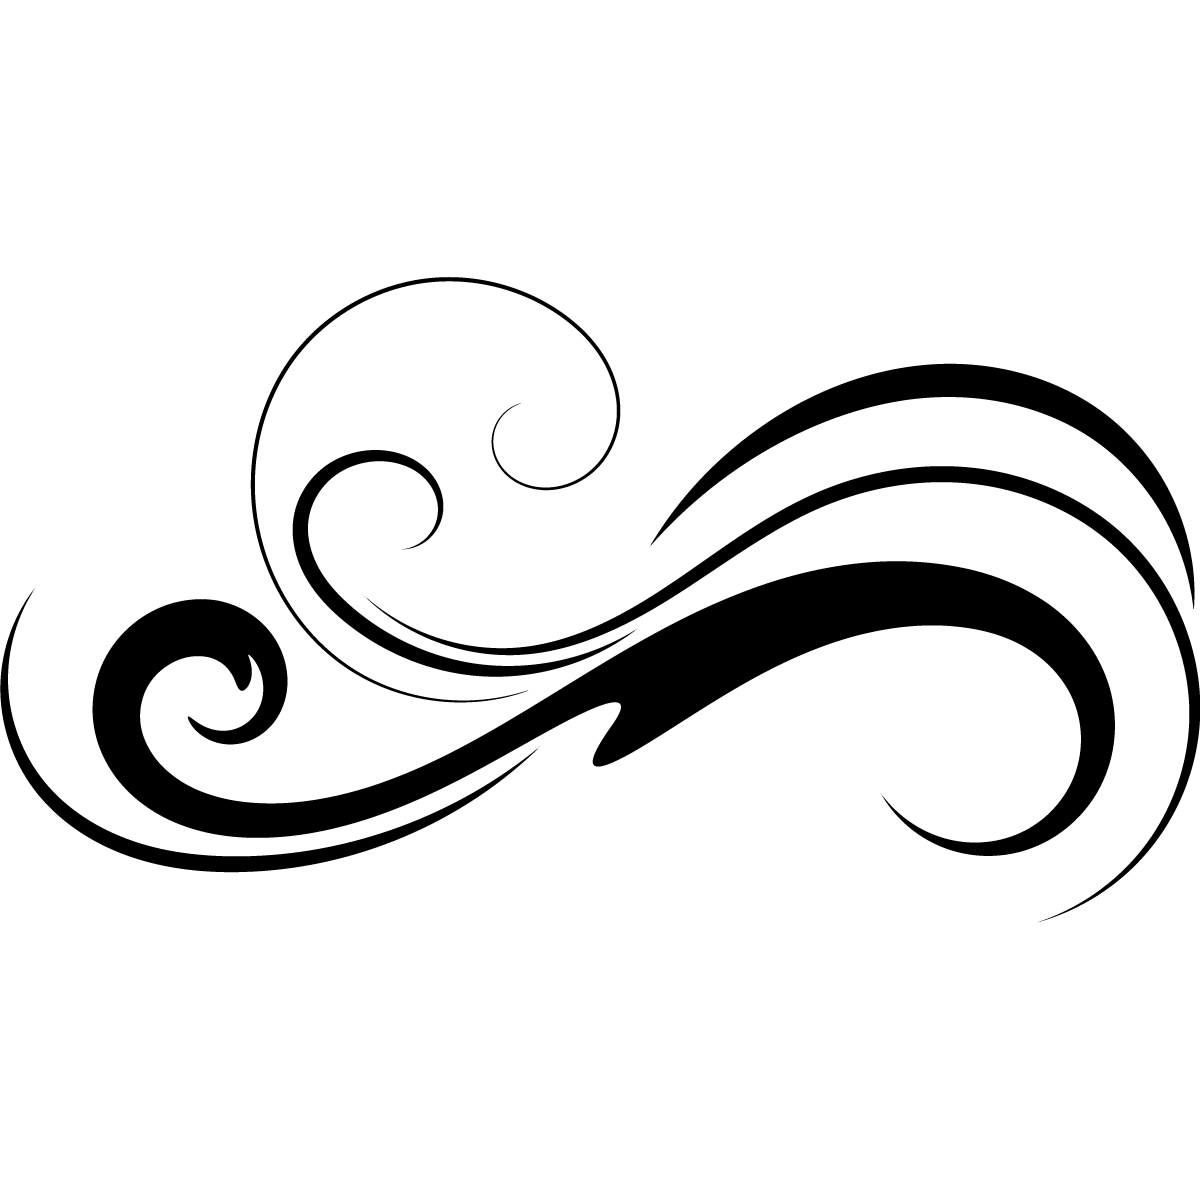 Water black and white waves clip art black and white gallery.